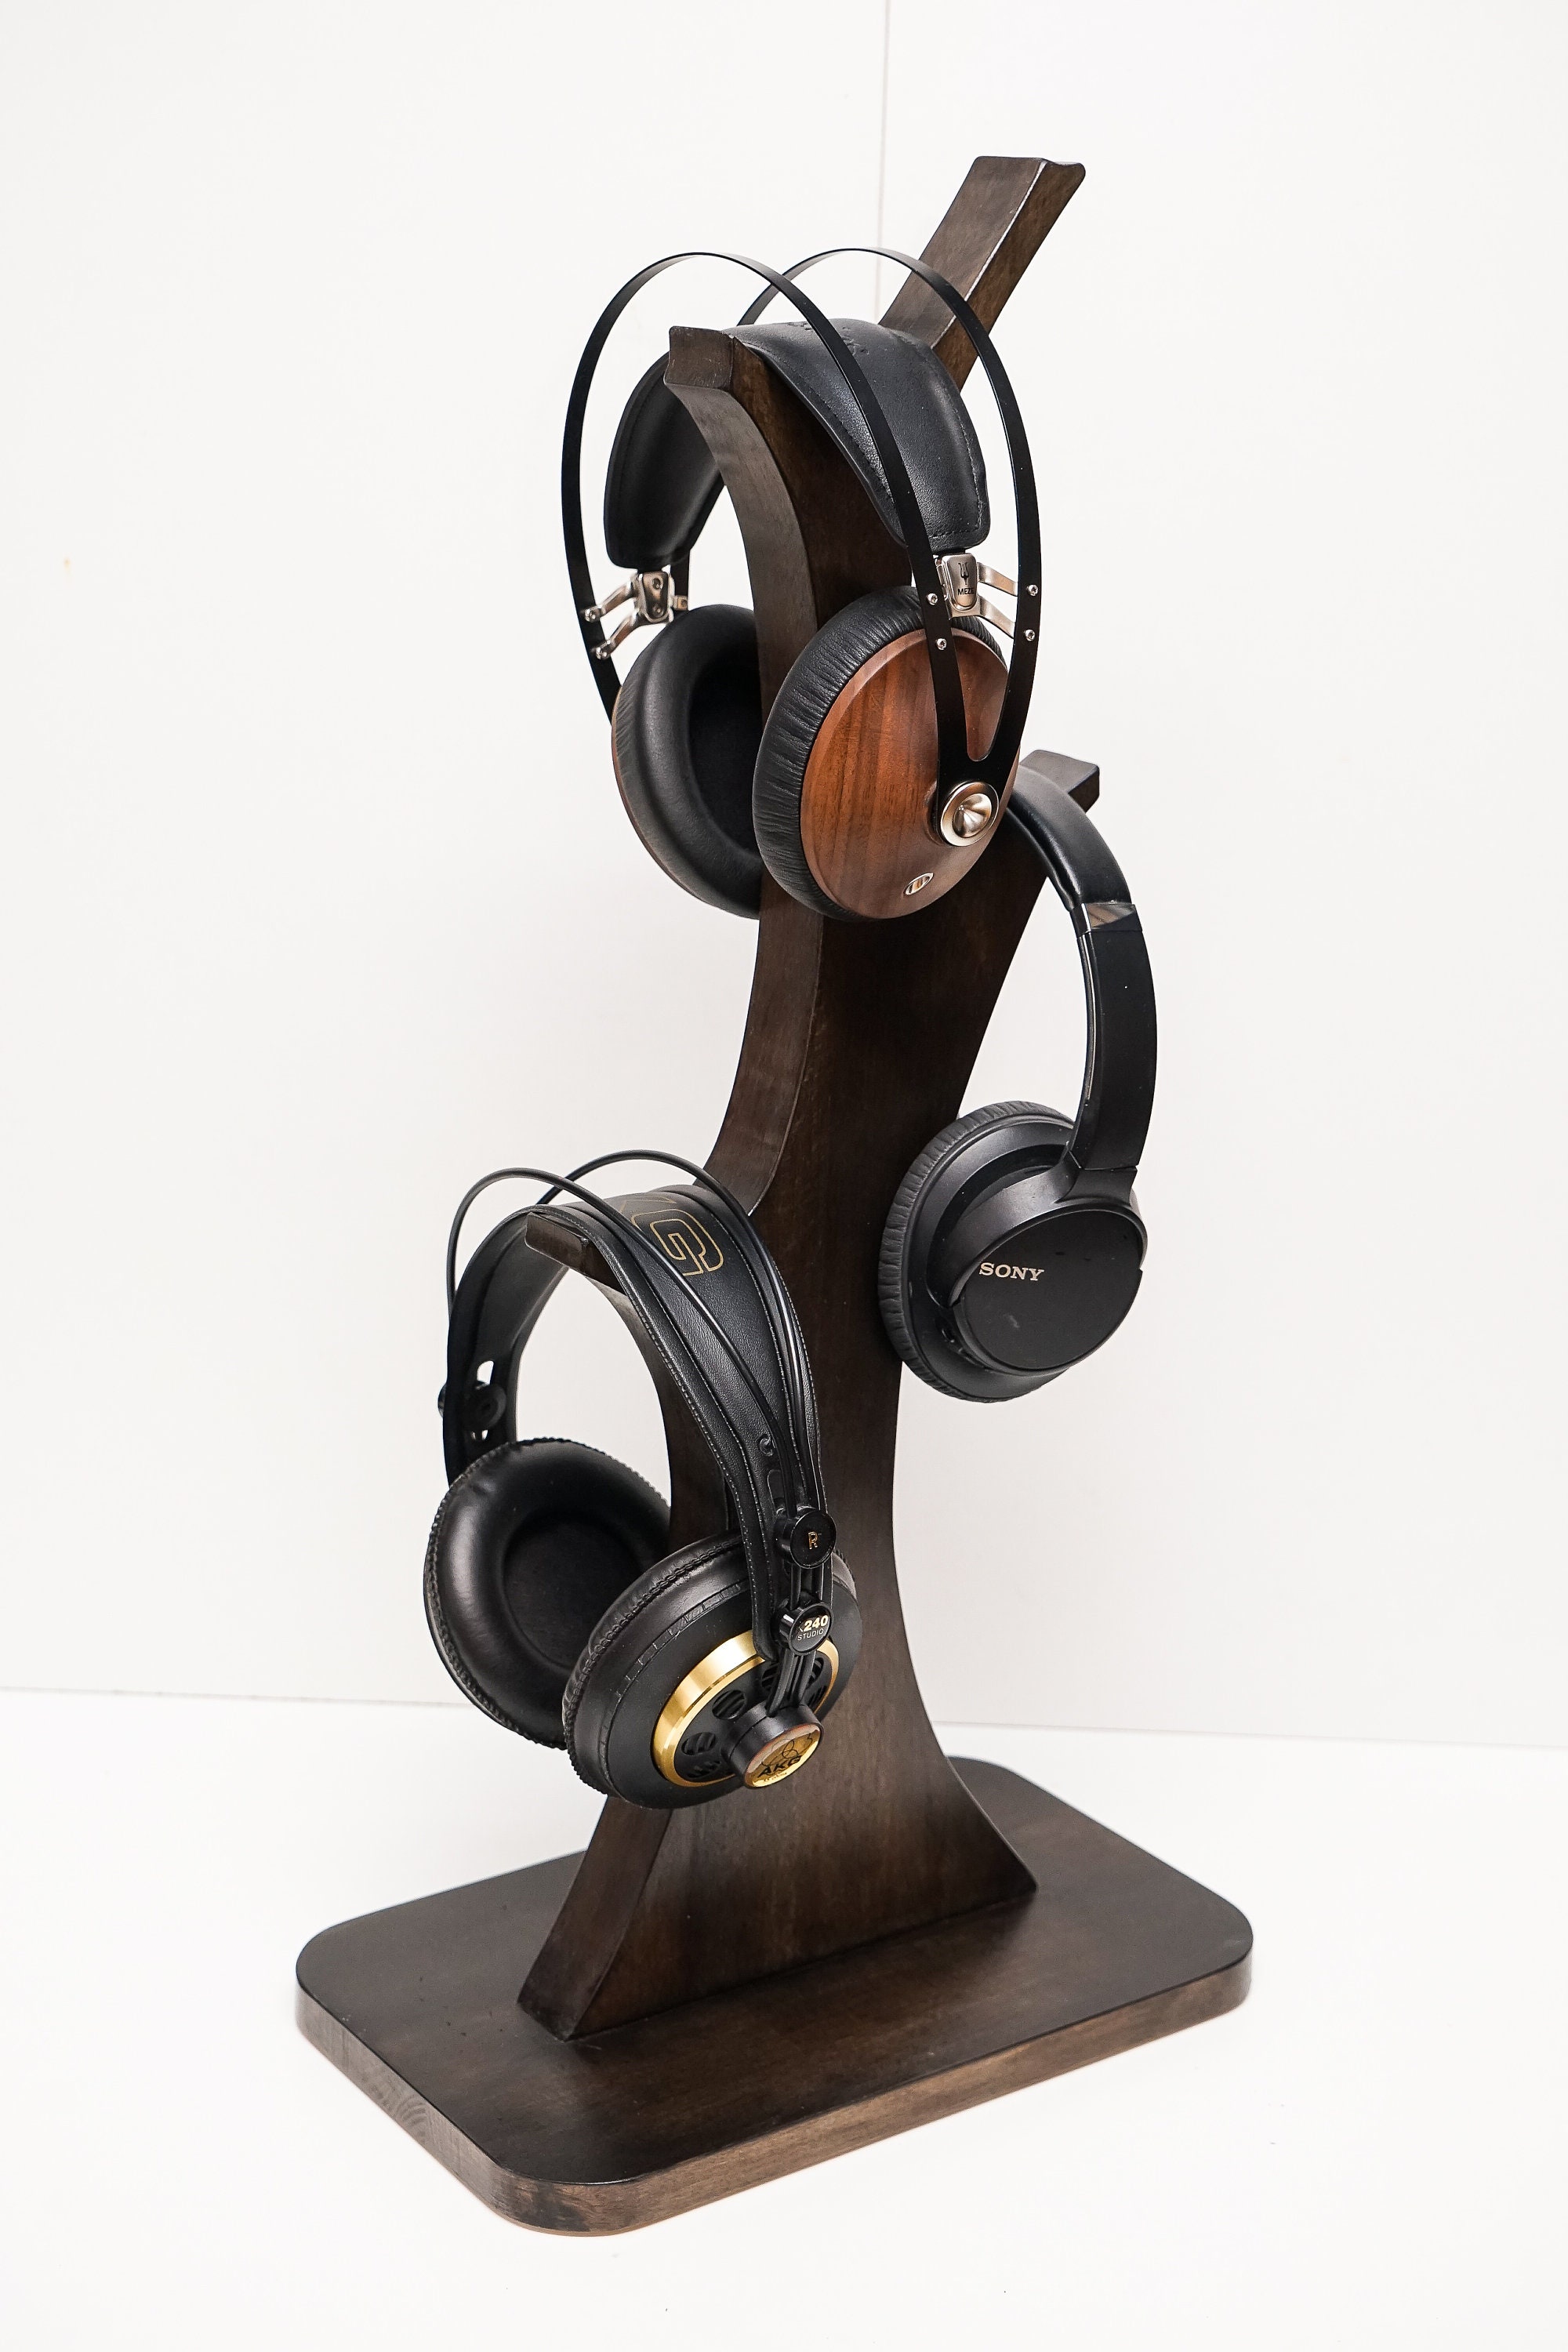 Tree Shaped Triple Headphone Stand Wooden Large Headphone Holder Headset  Stand for Audiophiles Handmade Solid Wood Office Decor 